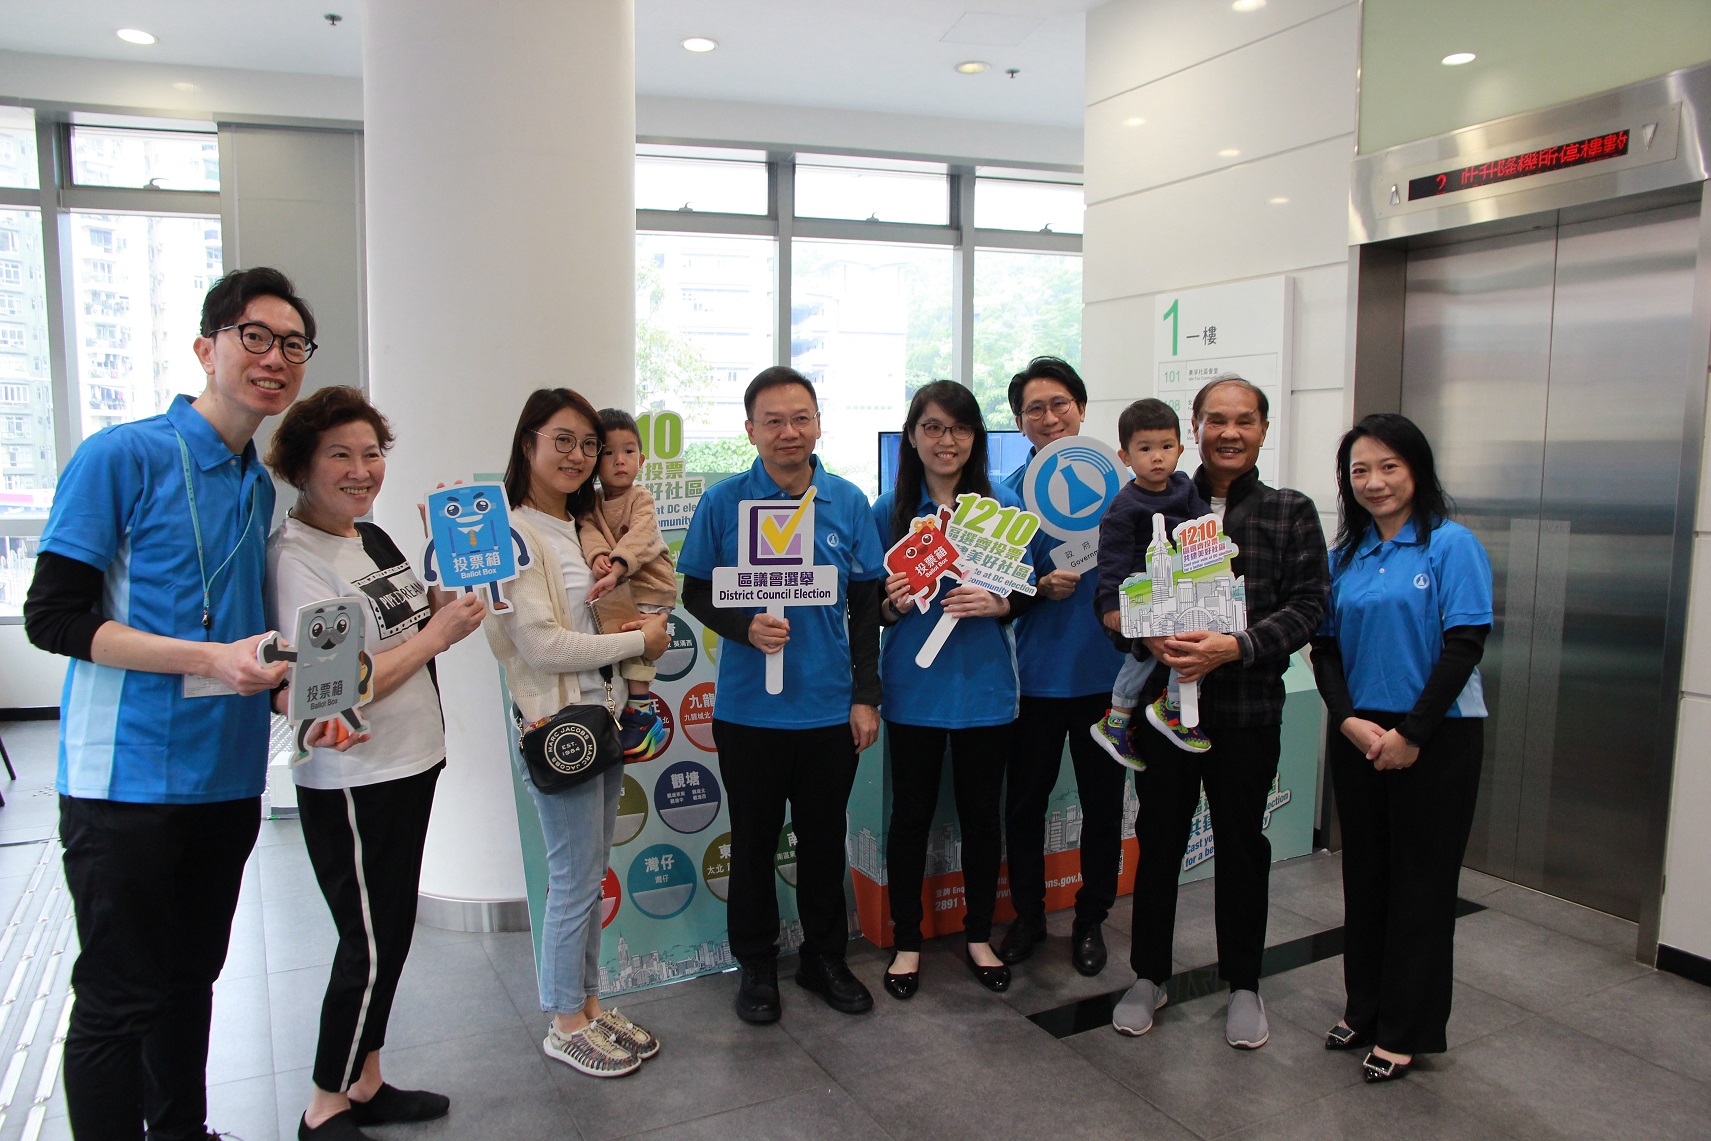 Photo 3: The Government Chemist, Dr LEE Wai-on (fifth left) taking photos with the public after playing interactive games.